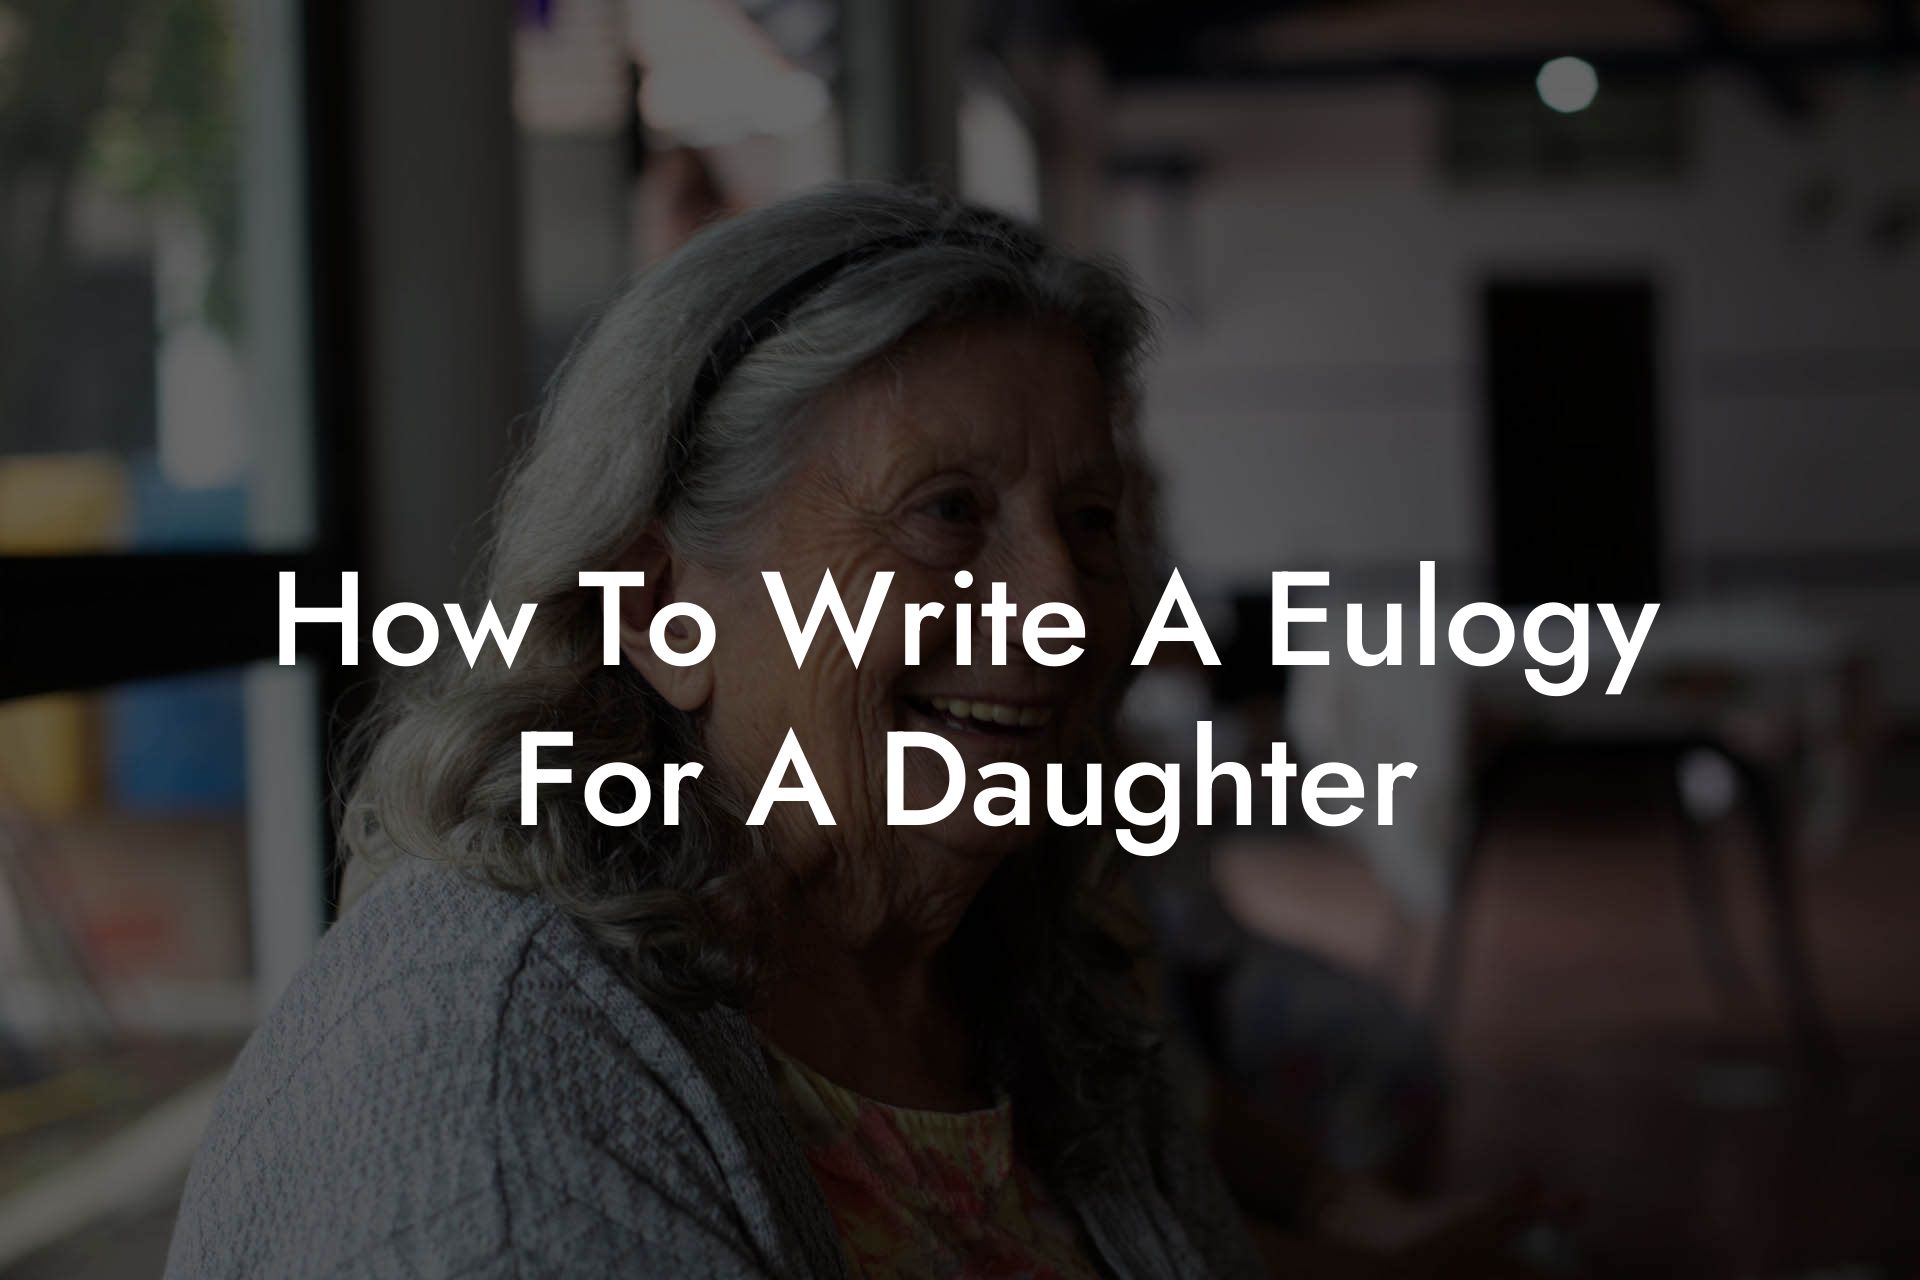 How To Write A Eulogy For A Daughter